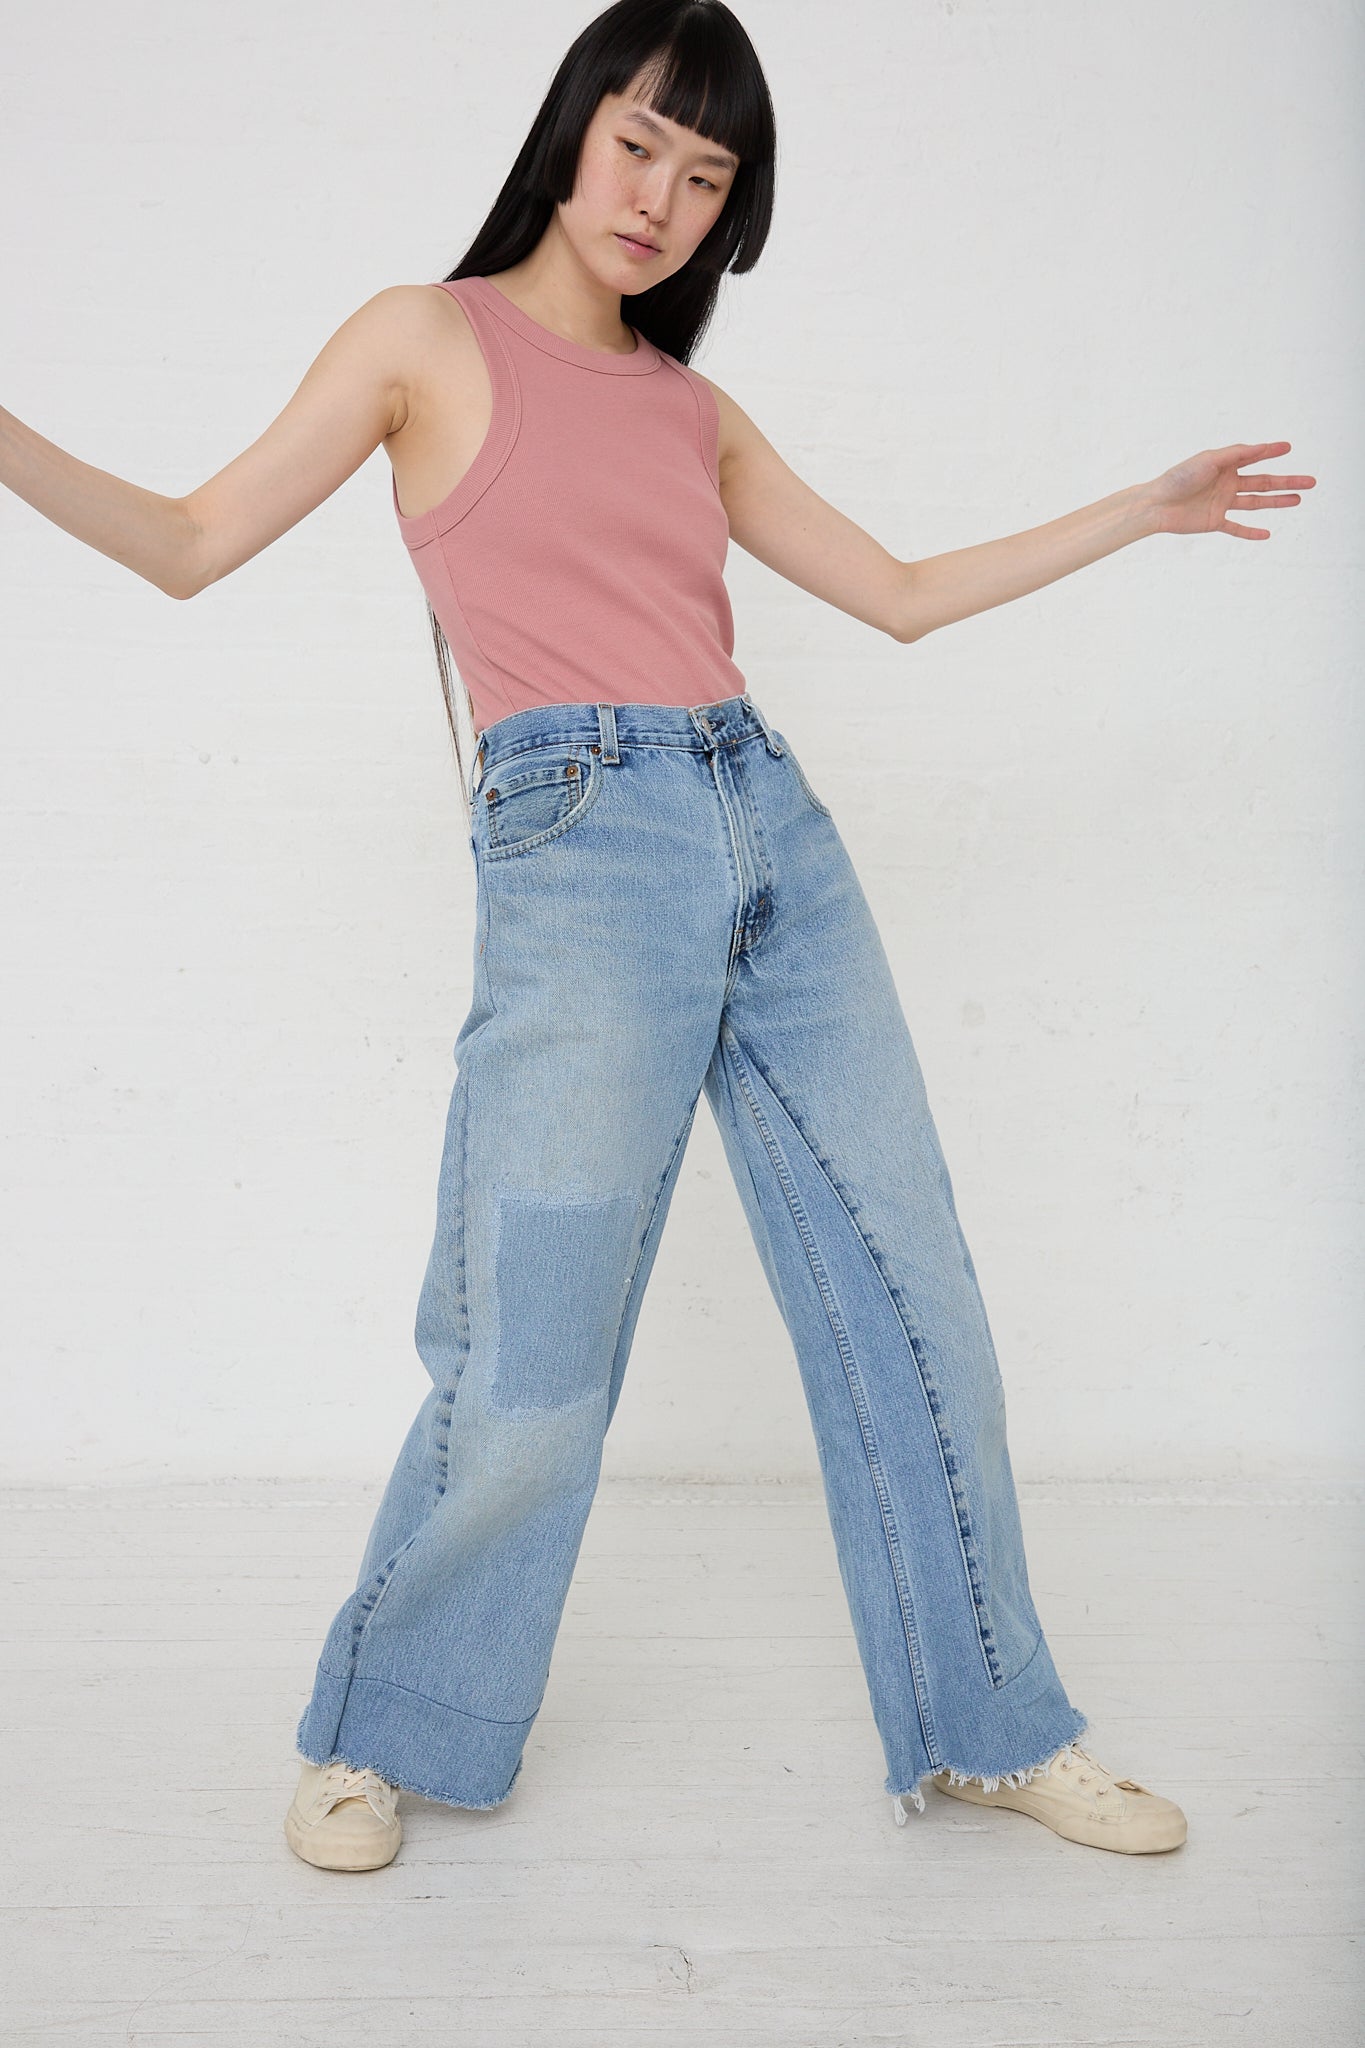 A woman in B Sides' Reworked Culotte in Vintage Indigo shorts and a pink tank top.